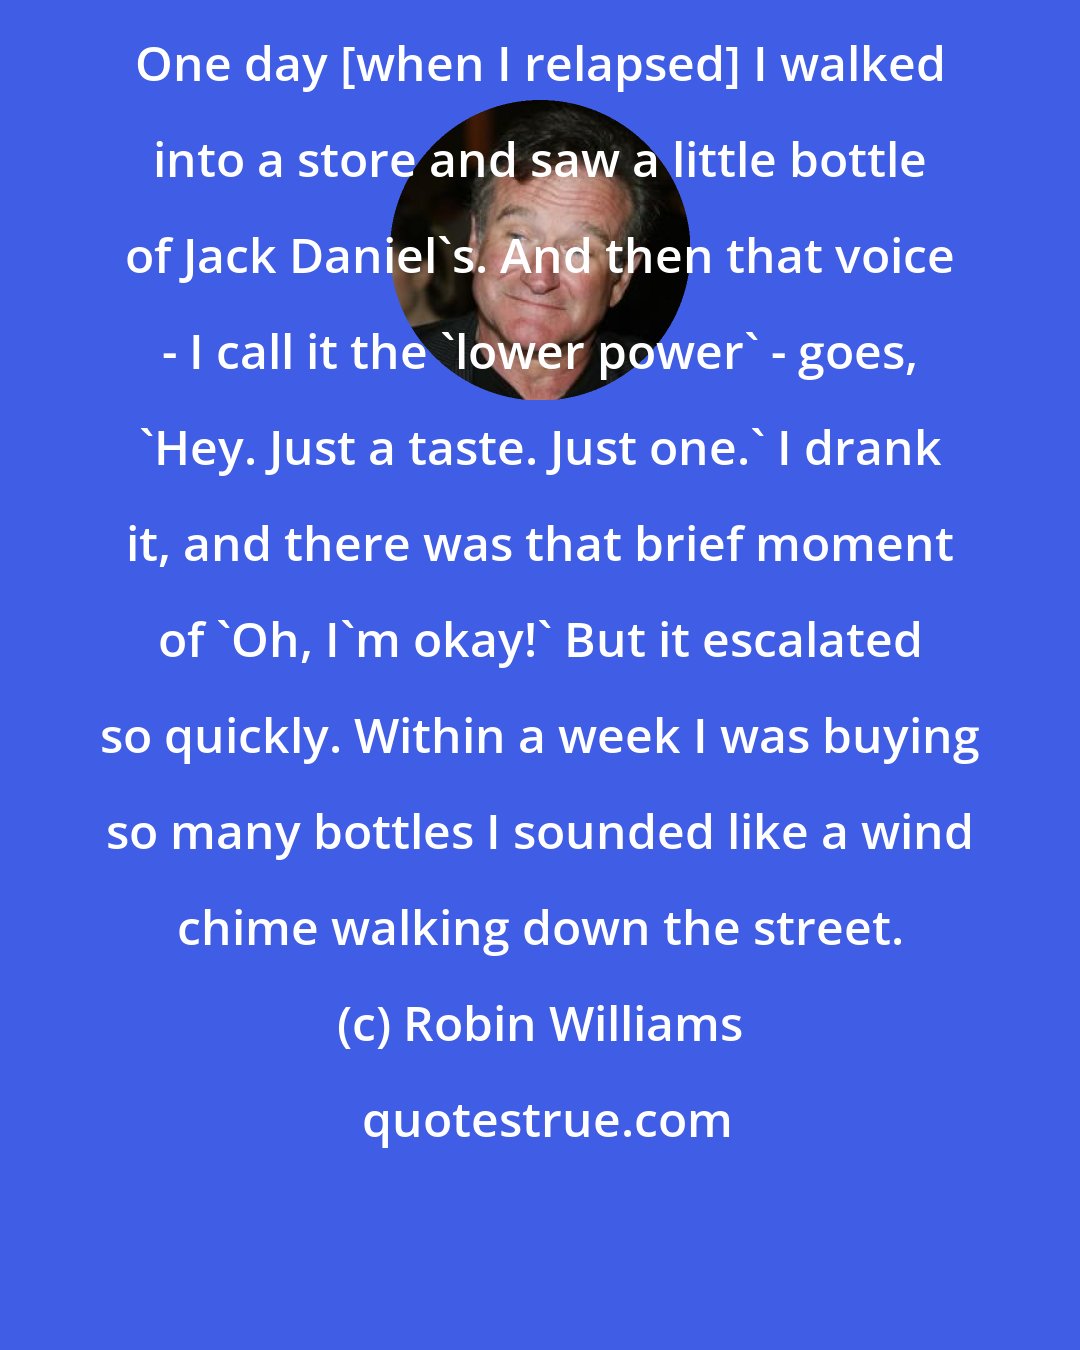 Robin Williams: One day [when I relapsed] I walked into a store and saw a little bottle of Jack Daniel's. And then that voice - I call it the 'lower power' - goes, 'Hey. Just a taste. Just one.' I drank it, and there was that brief moment of 'Oh, I'm okay!' But it escalated so quickly. Within a week I was buying so many bottles I sounded like a wind chime walking down the street.